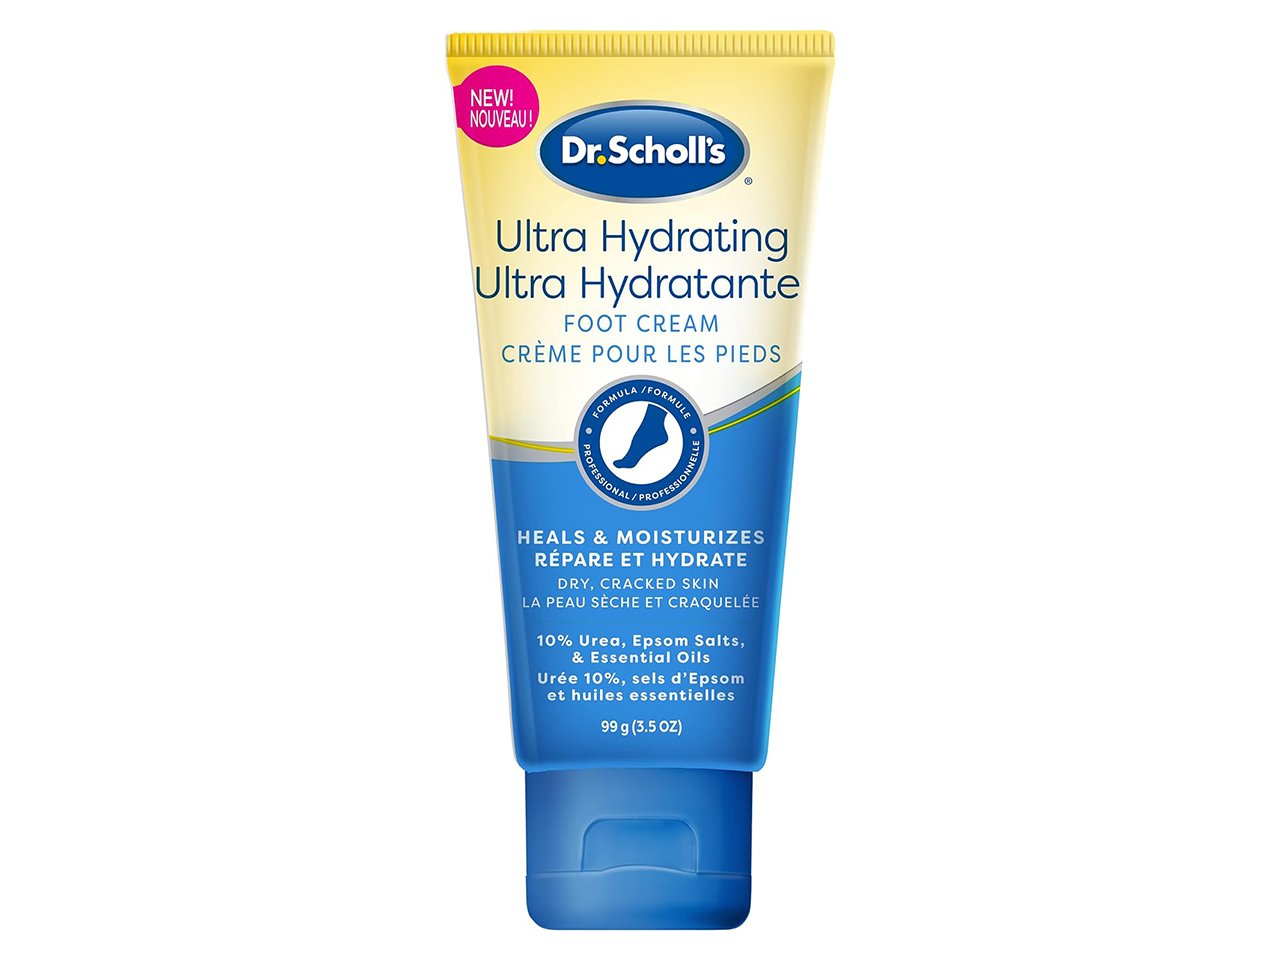 Dr. Scholl's Ultra Hydrating Foot Cream, at-home pedicure